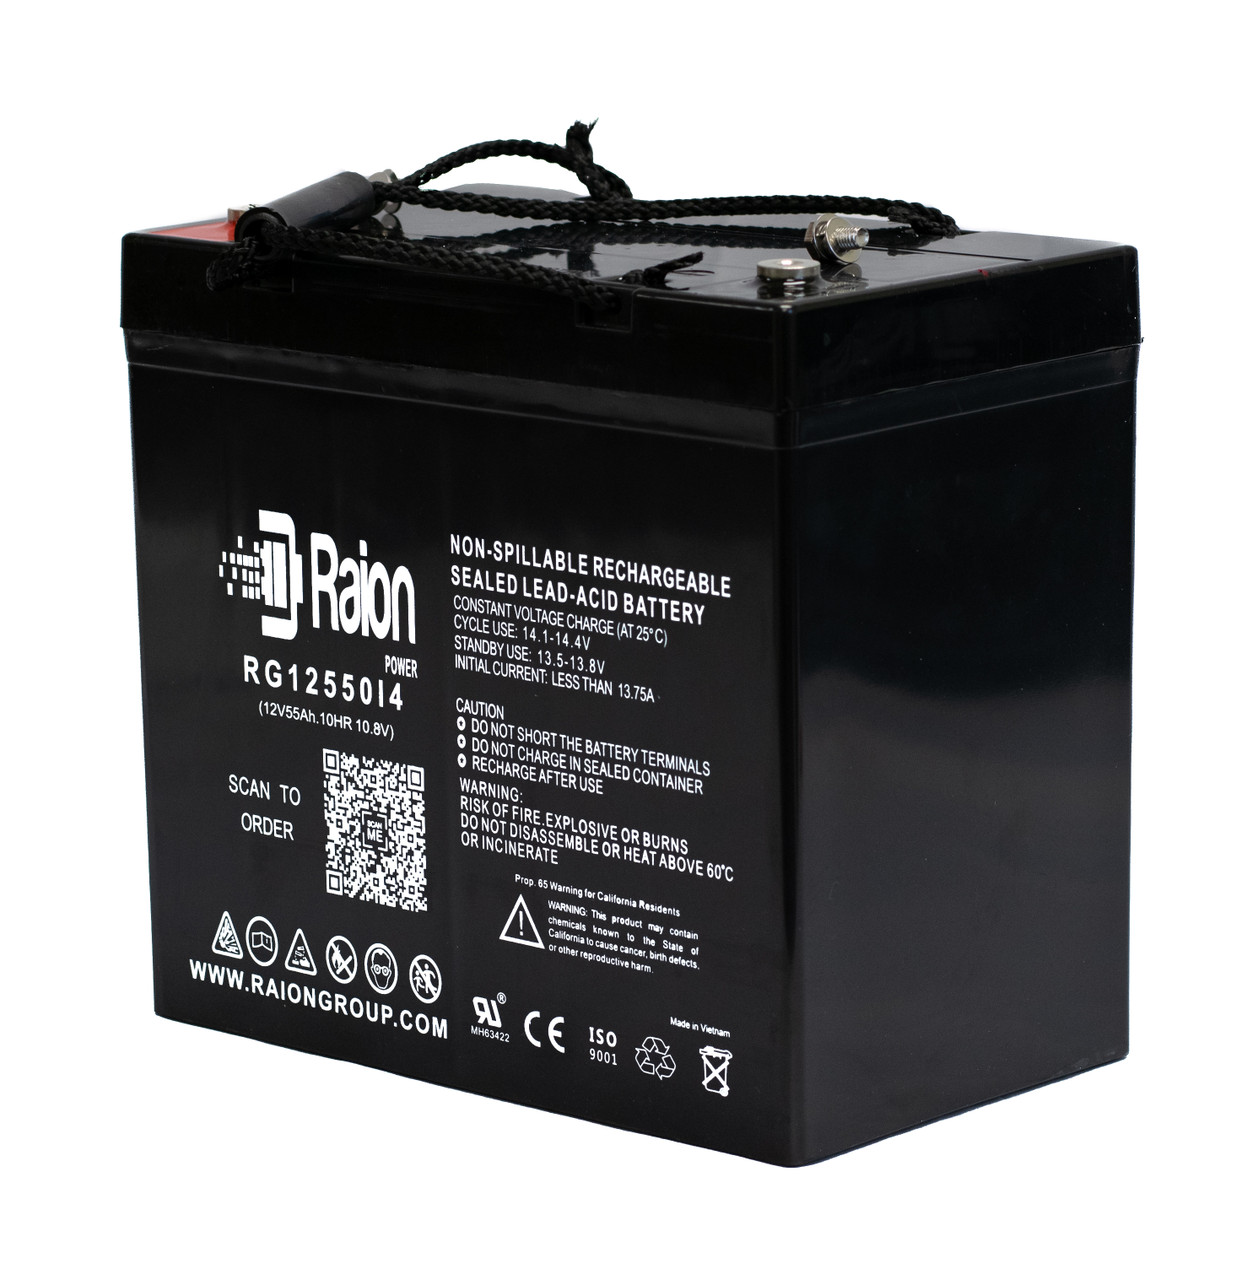 Raion Power 12V 55Ah 22NF Mobility Scooter Battery Replacement for Shoprider TE889DX2-4